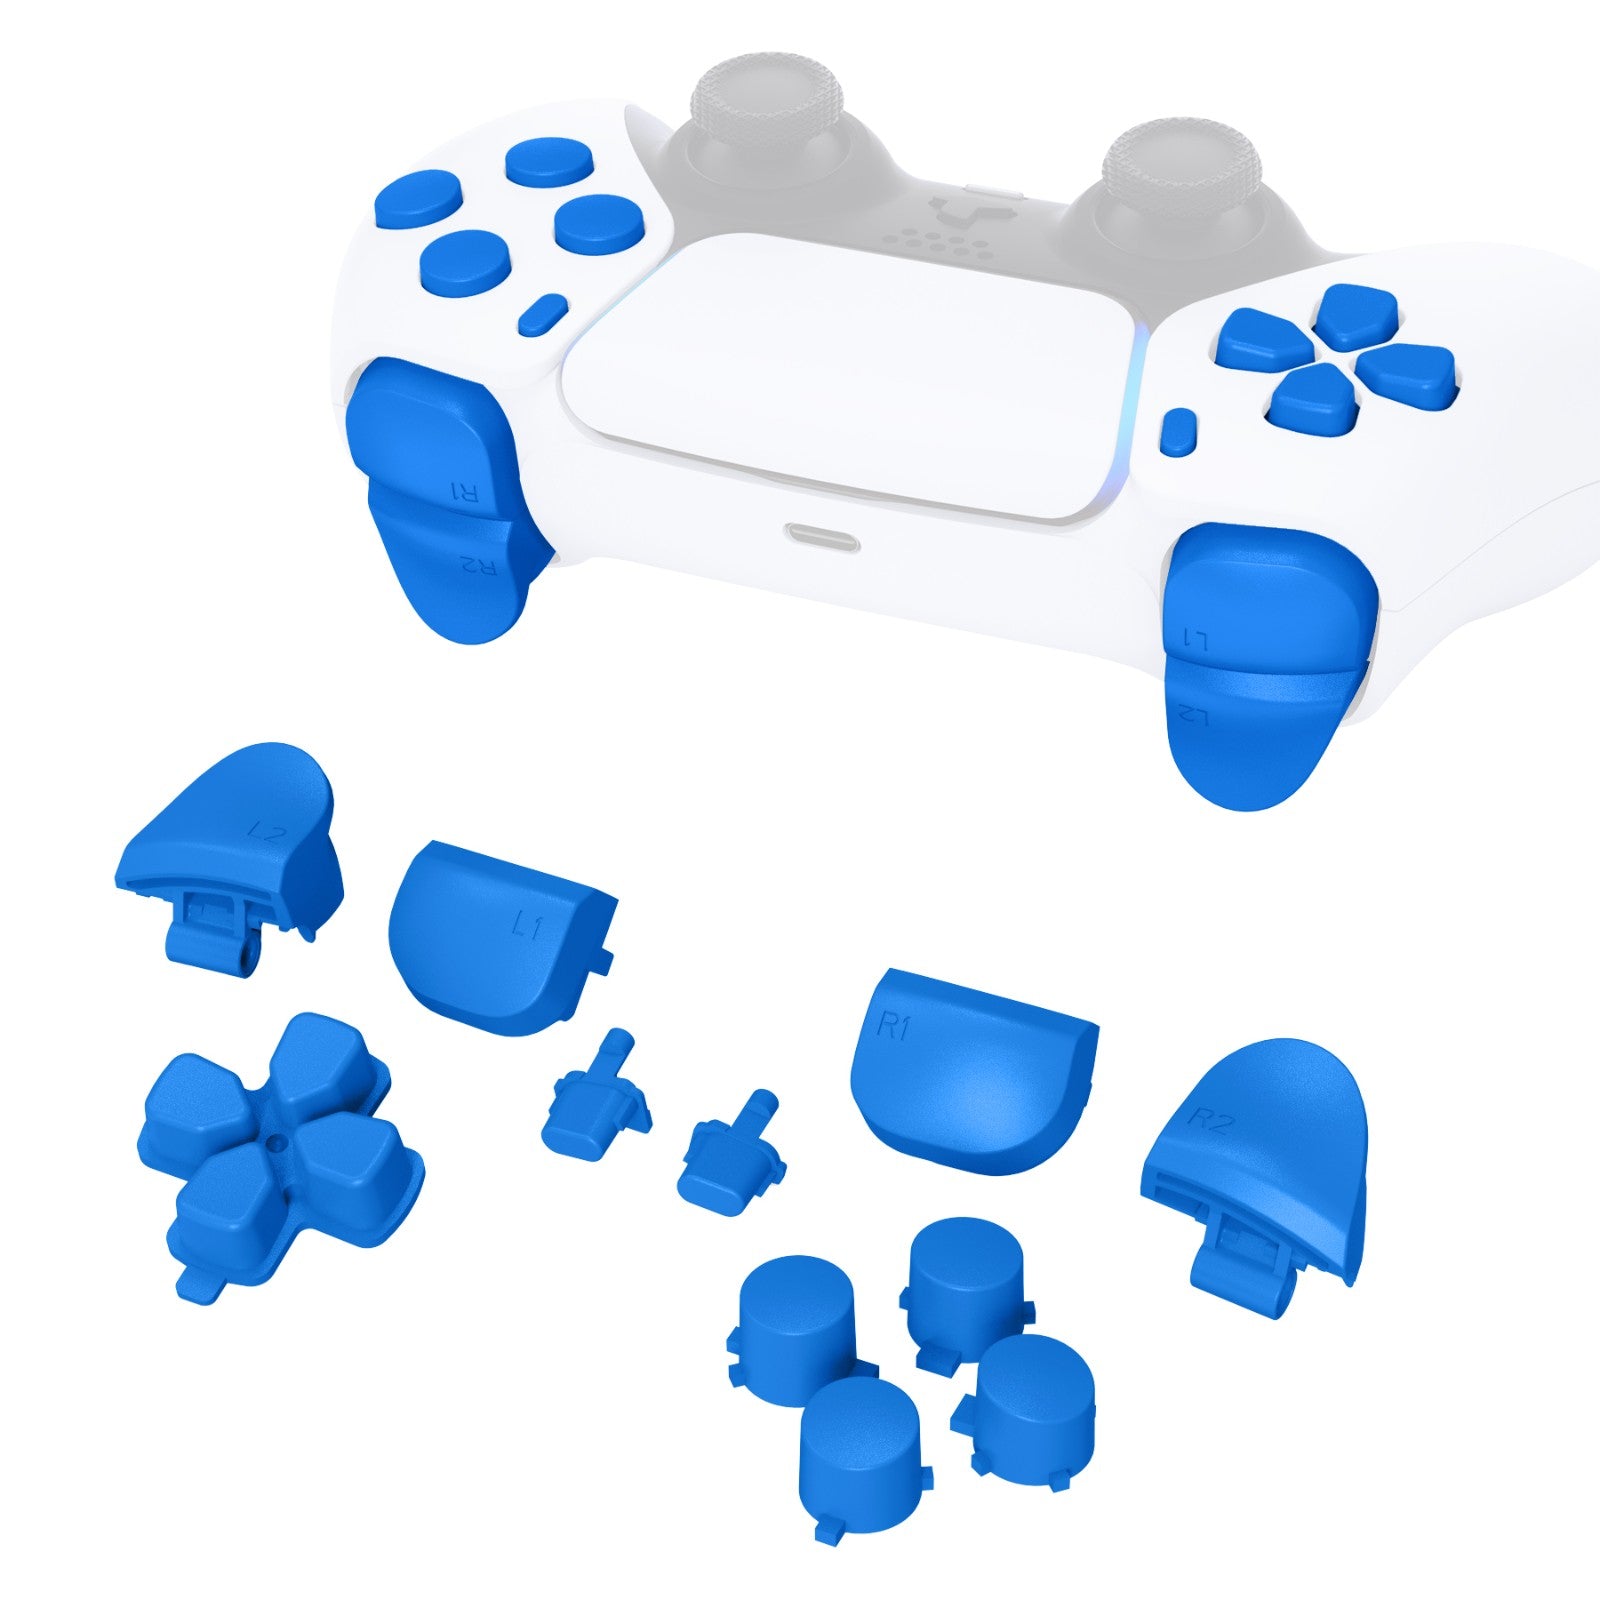 eXtremeRate Retail Replacement D-pad R1 L1 R2 L2 Triggers Share Options Face Buttons, Blue Full Set Buttons Compatible with ps5 Controller BDM-010 & BDM-020 - JPF1005G2